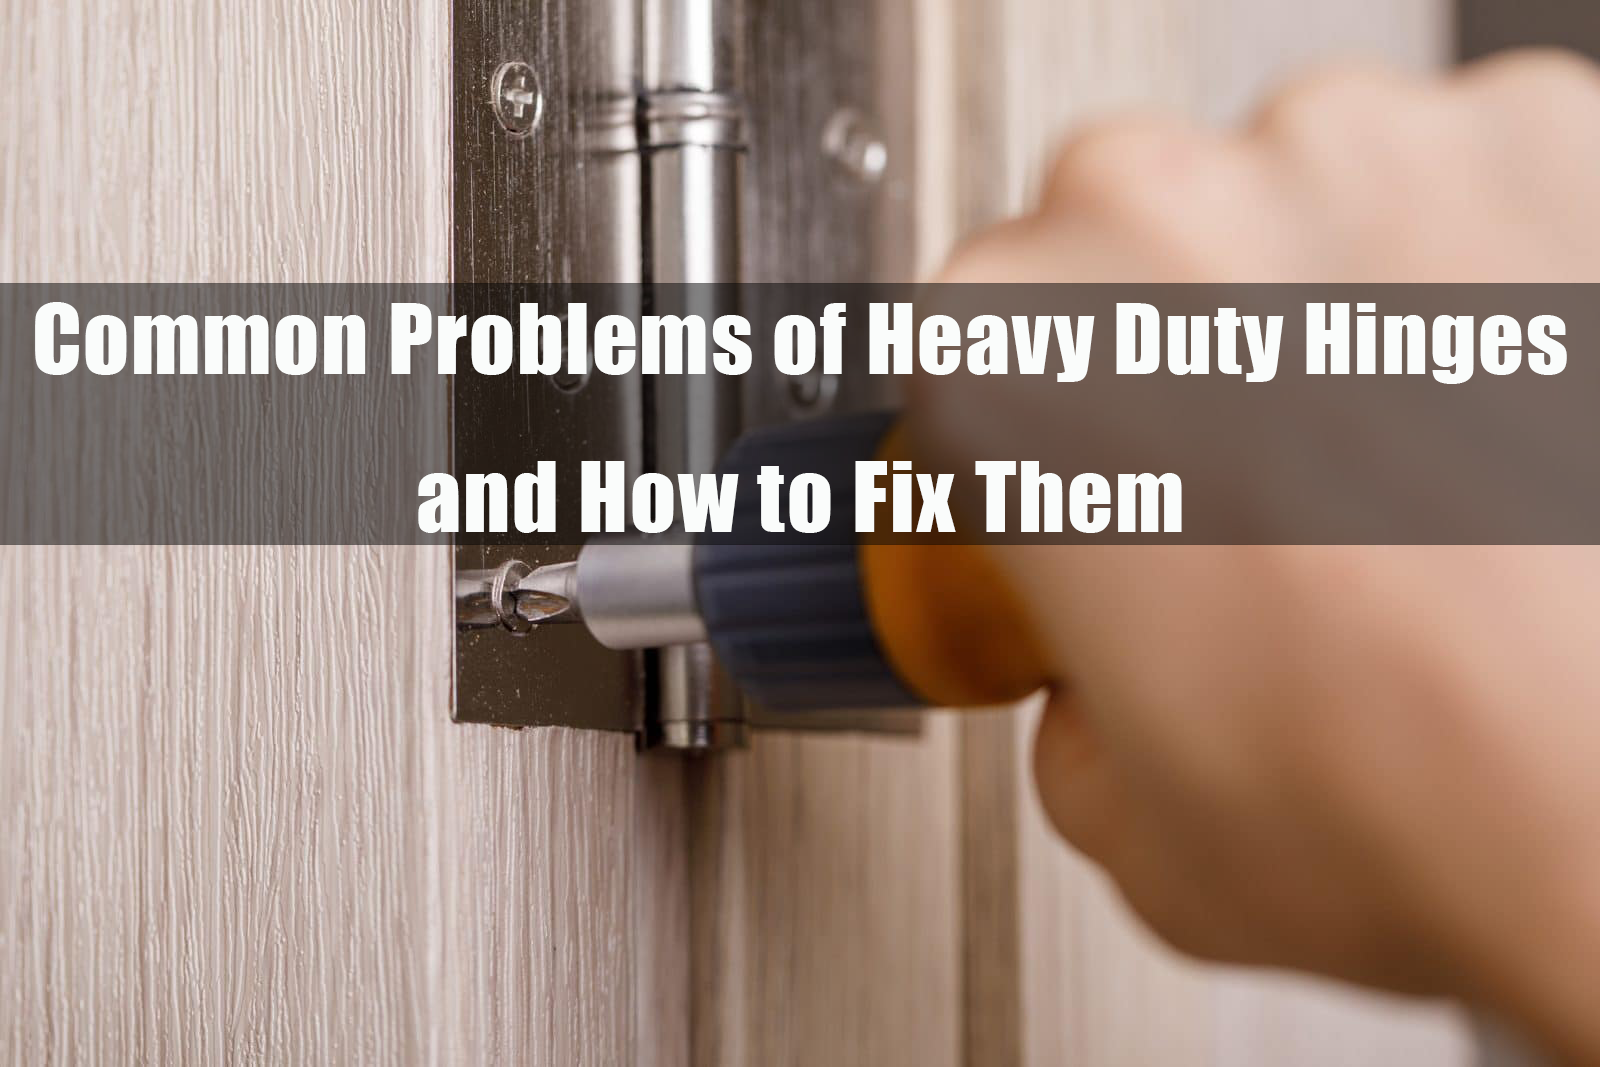 Common Problems of Heavy Duty Hinges and How to Fix Them